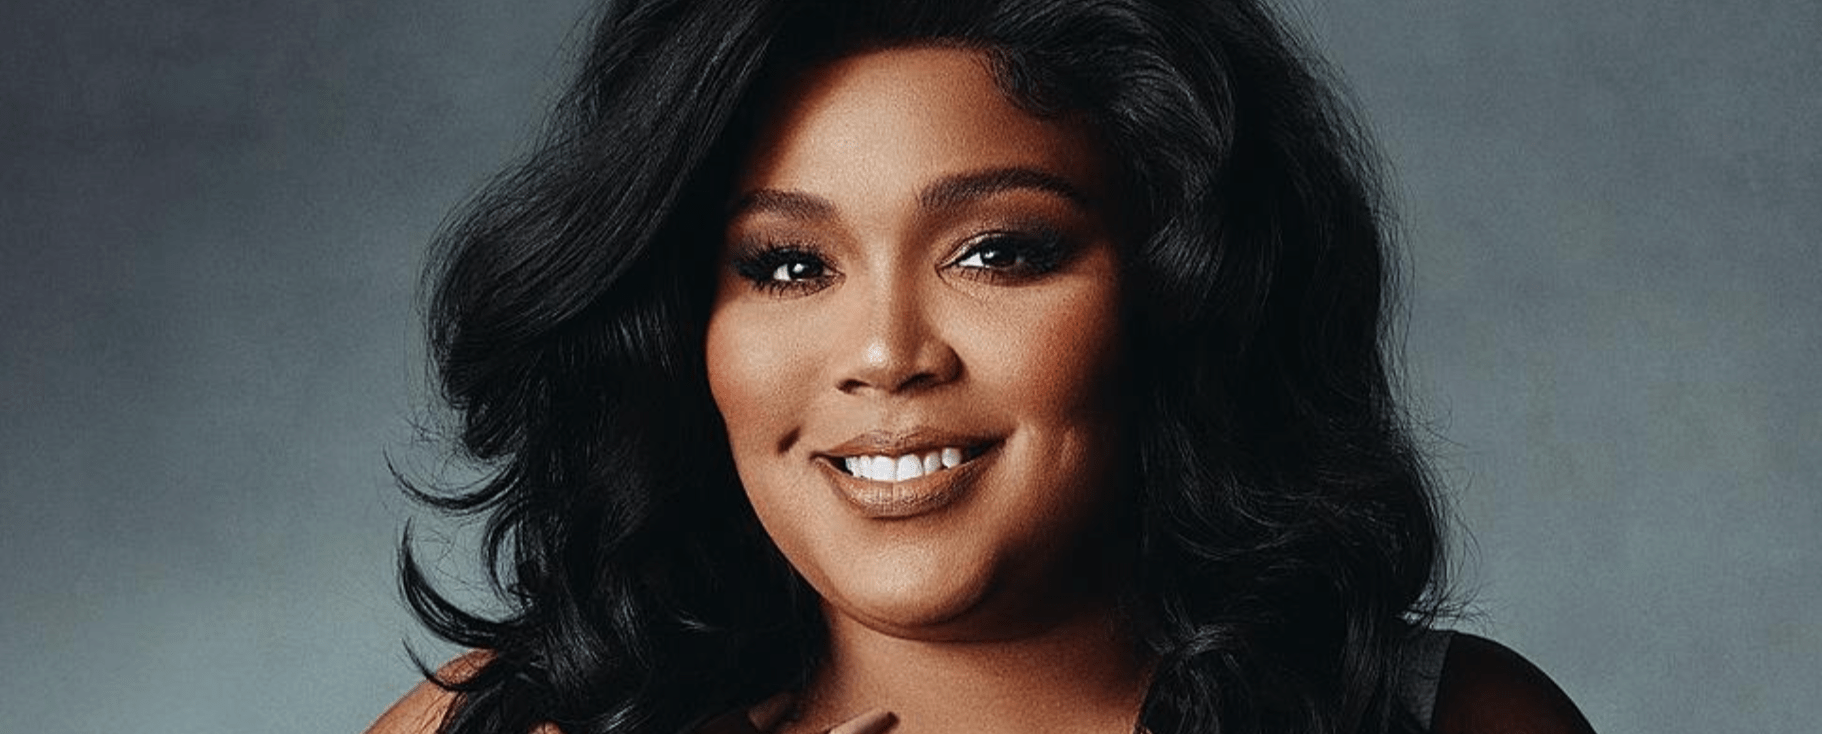 In an exclusive interview, Lizzo elaborates on the importance of being present for queer and marginalized fans, highlighting her personal connection with a multitude of individuals.